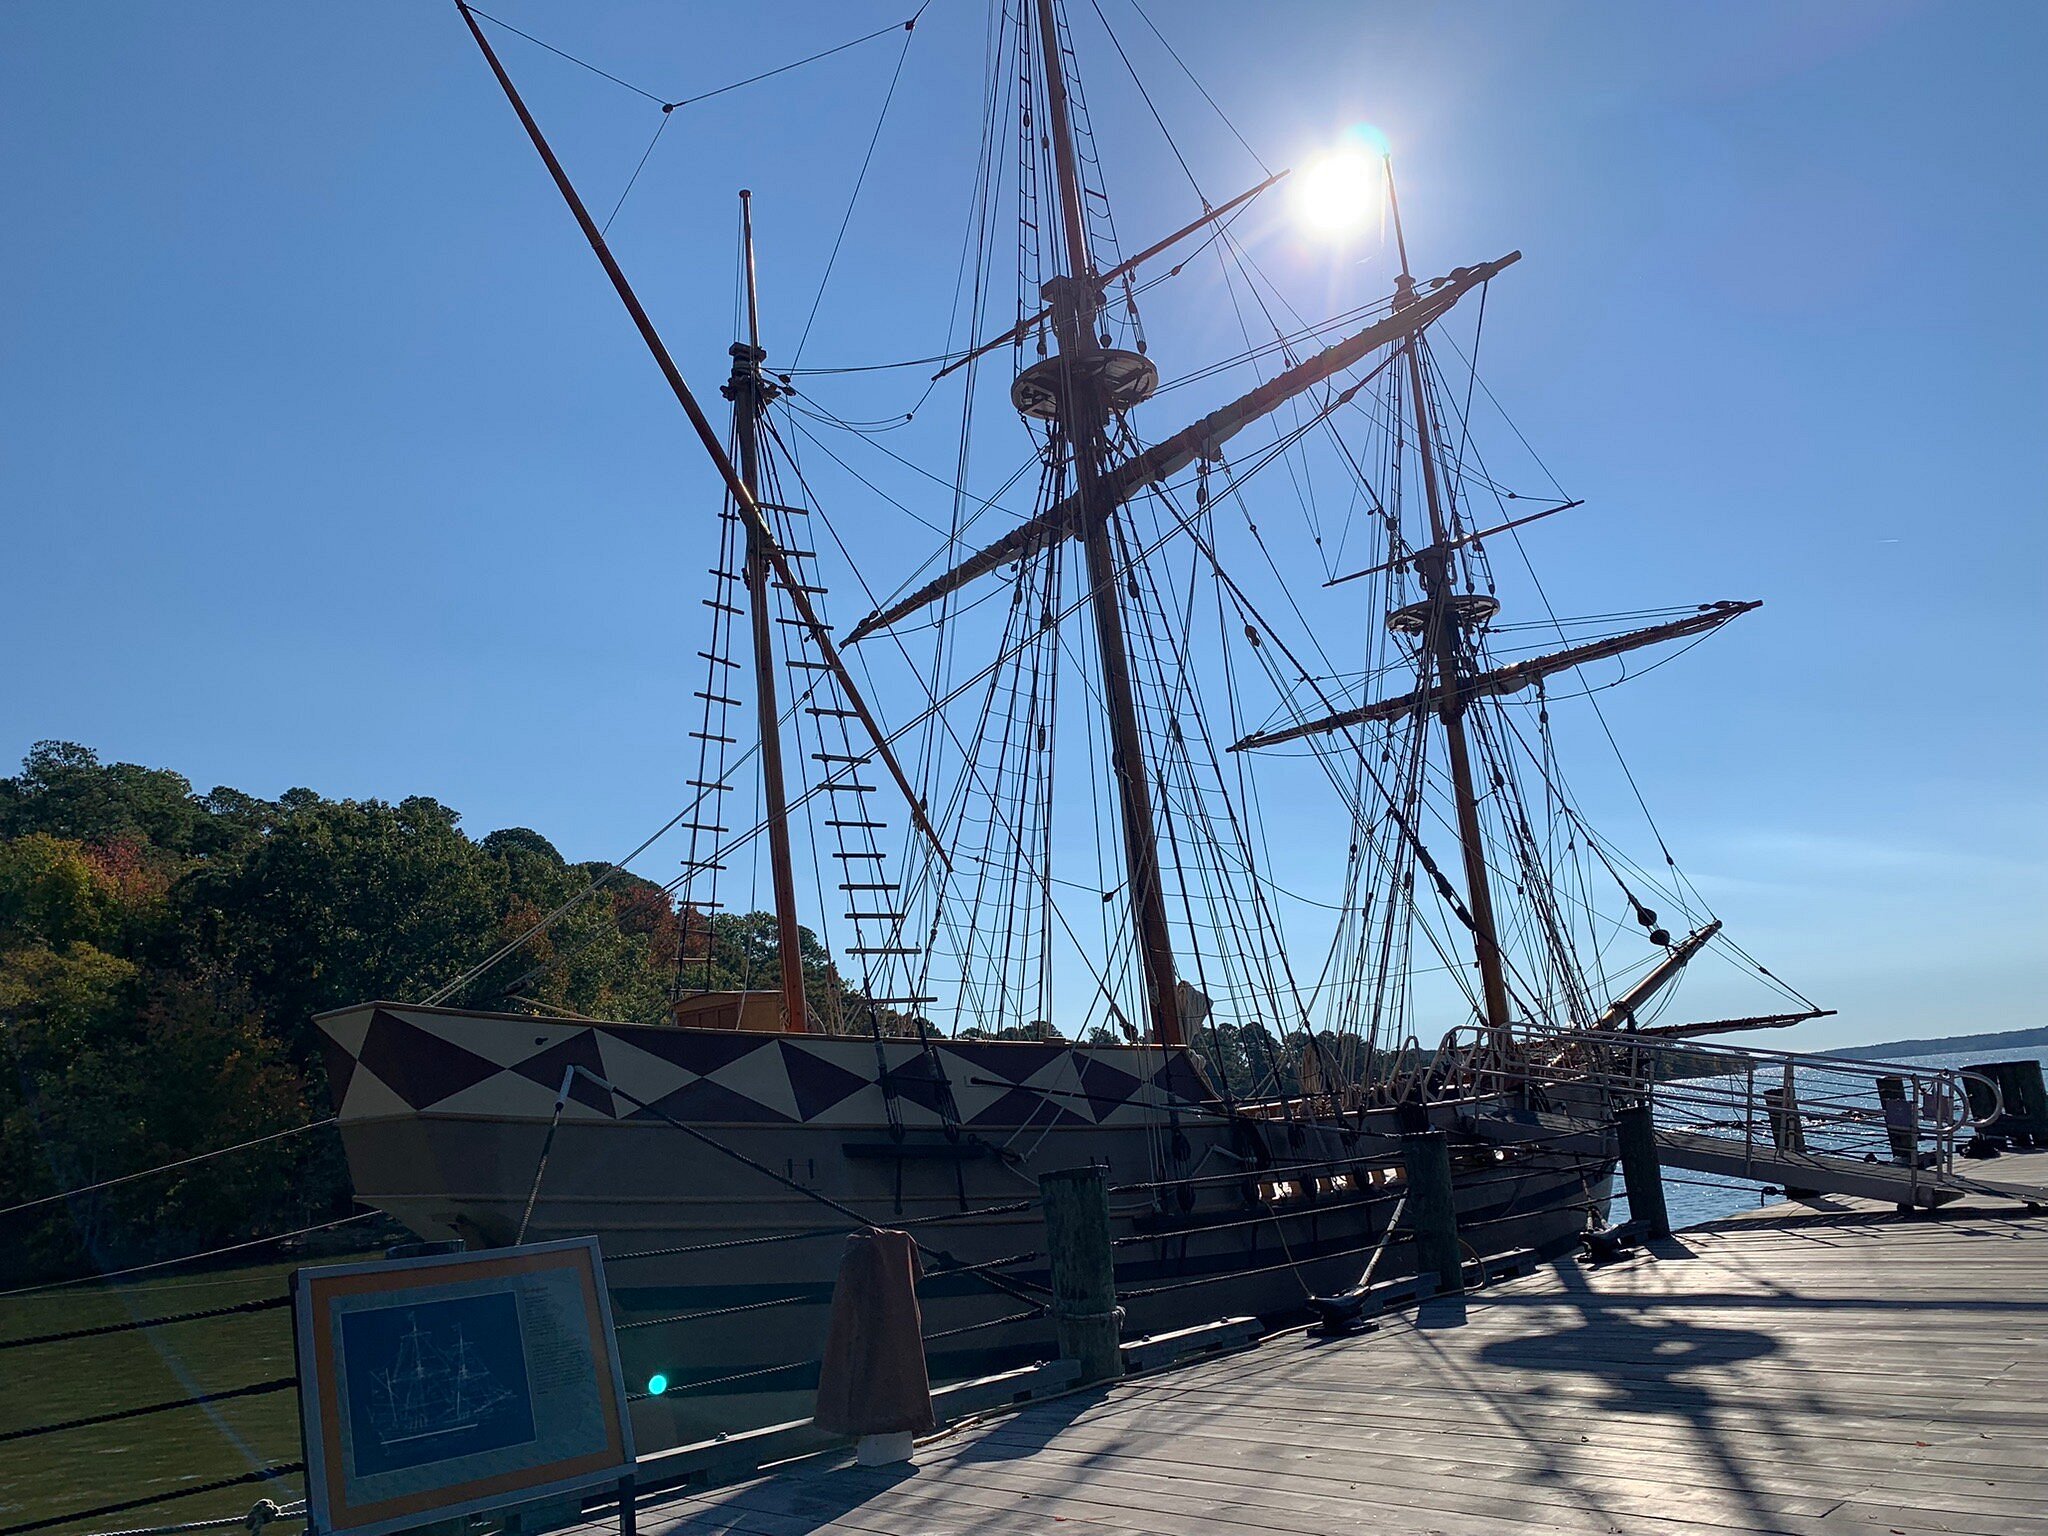 jamestown discovery boat tours photos